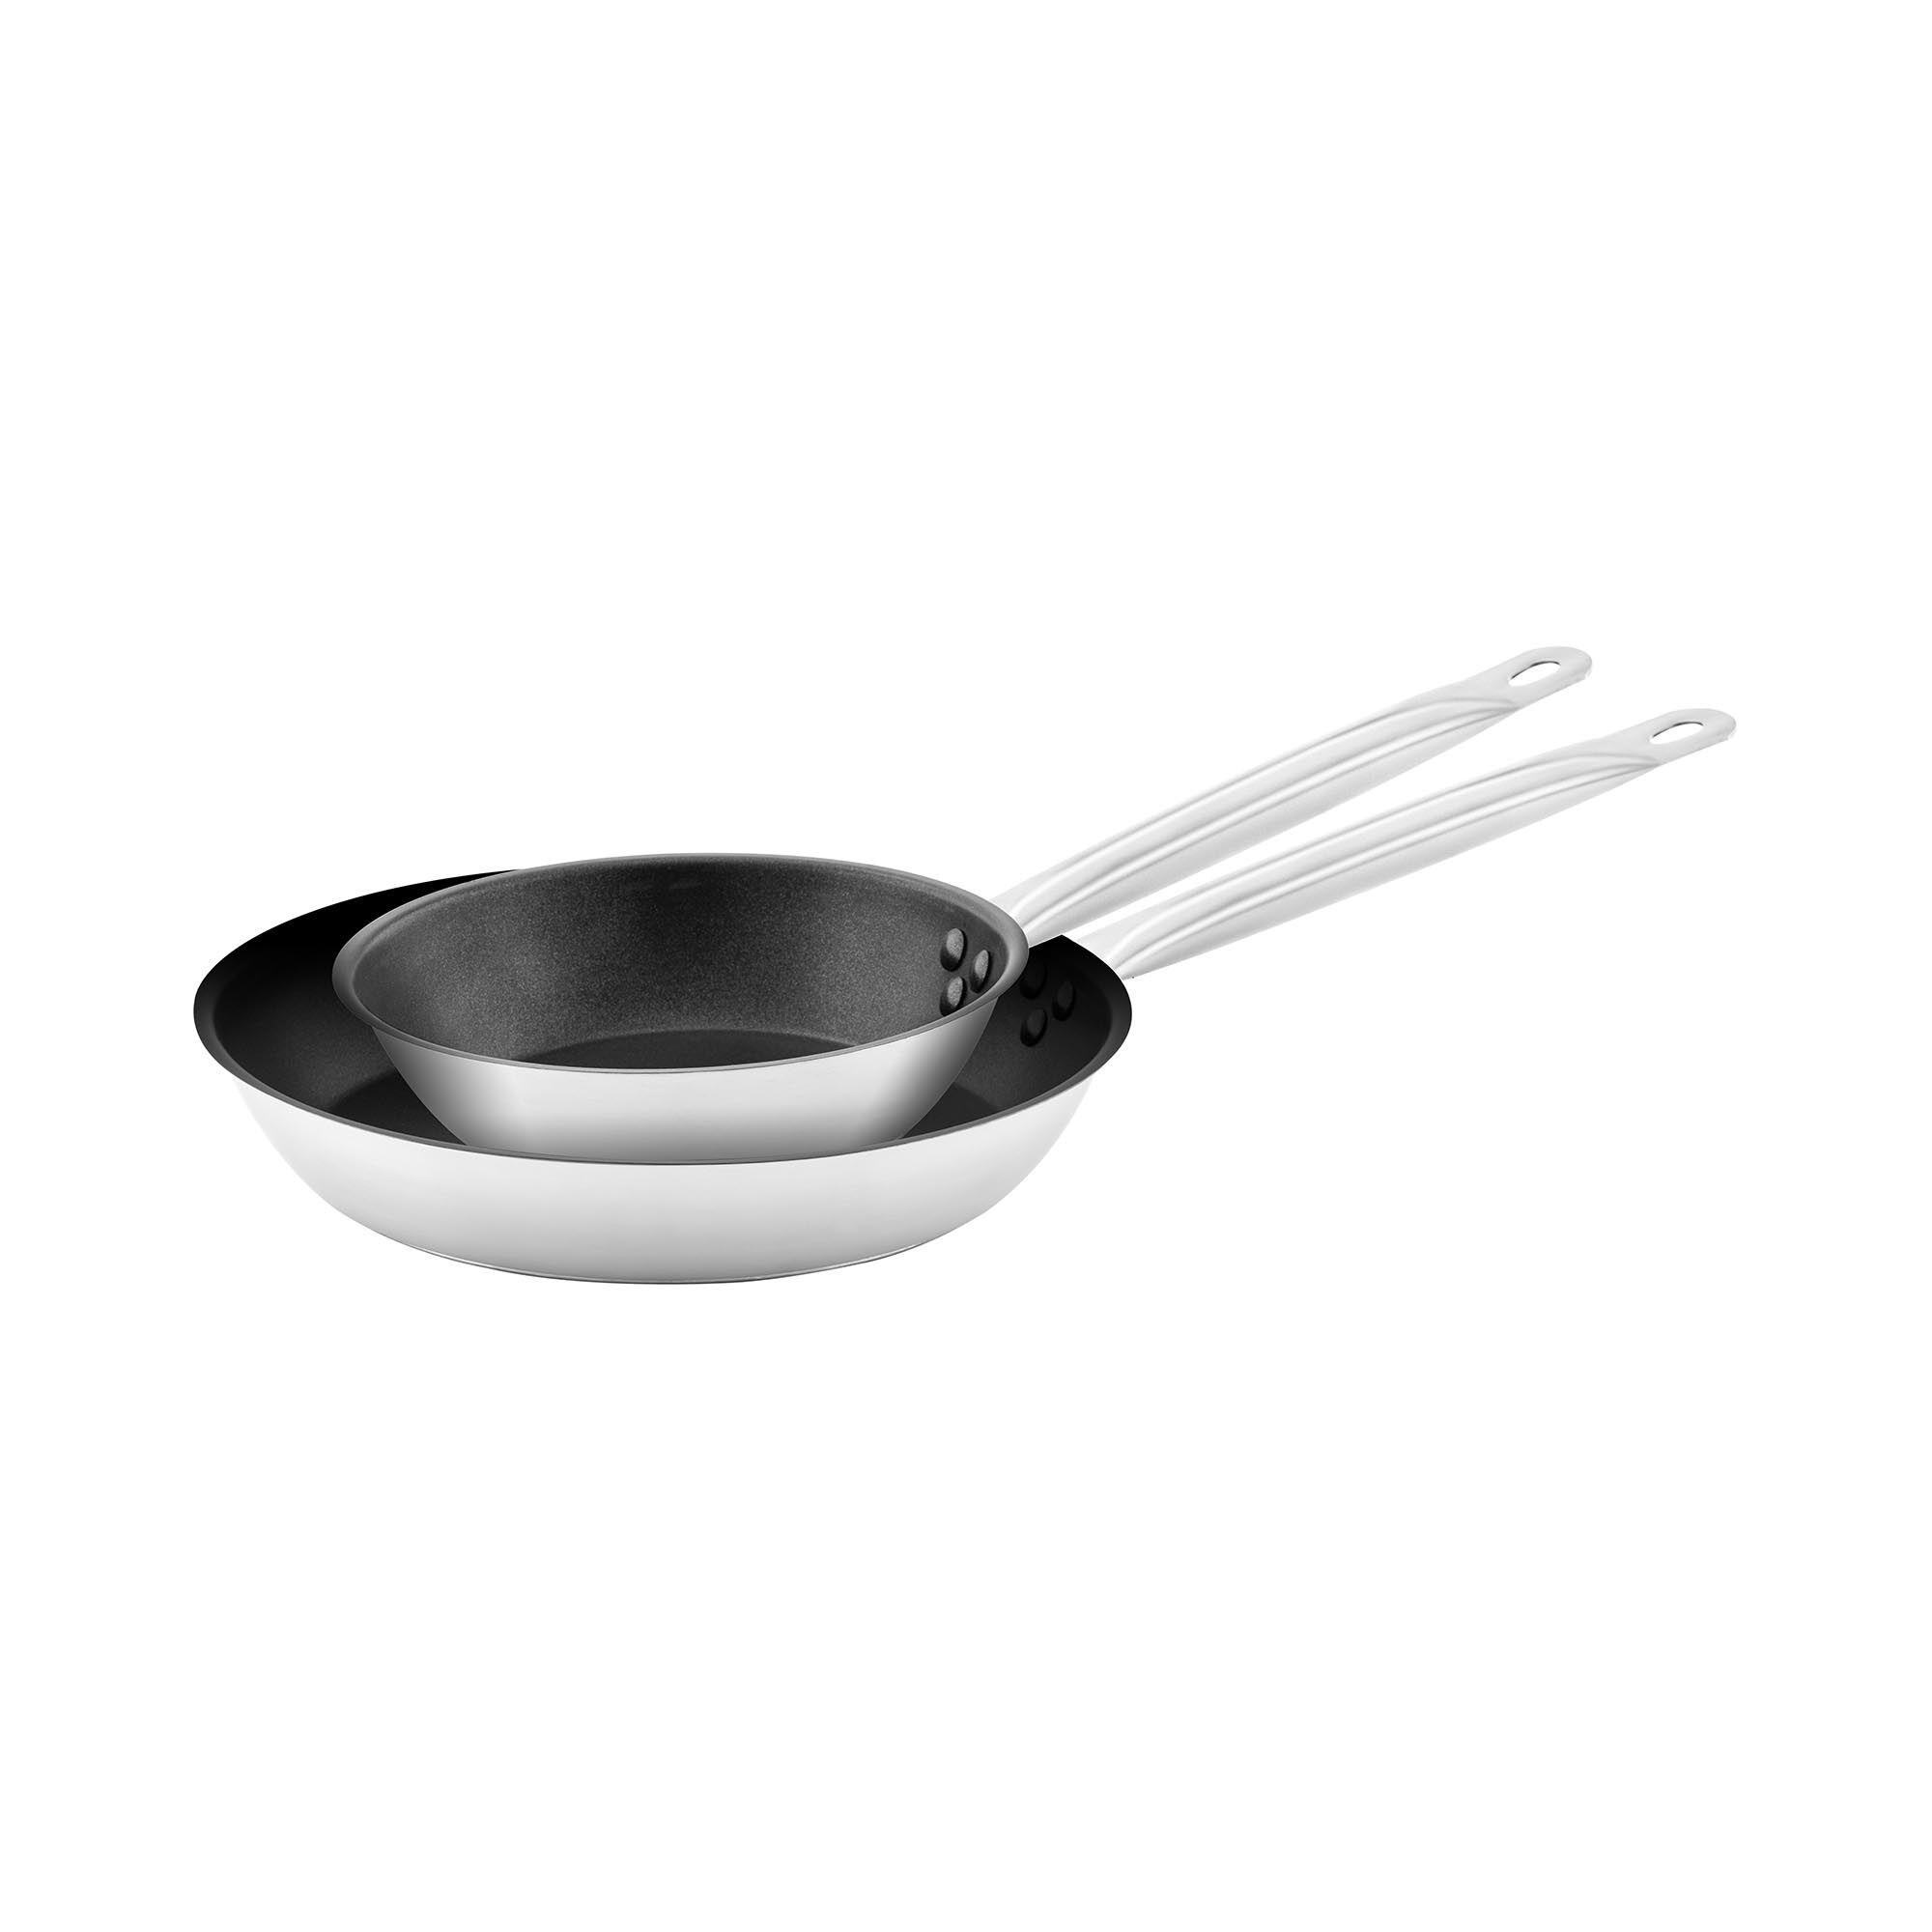 Royal Catering Stainless Steel Frying Pan - 2 pcs. - coated - Ø 20 / 28 cm x 5 cm